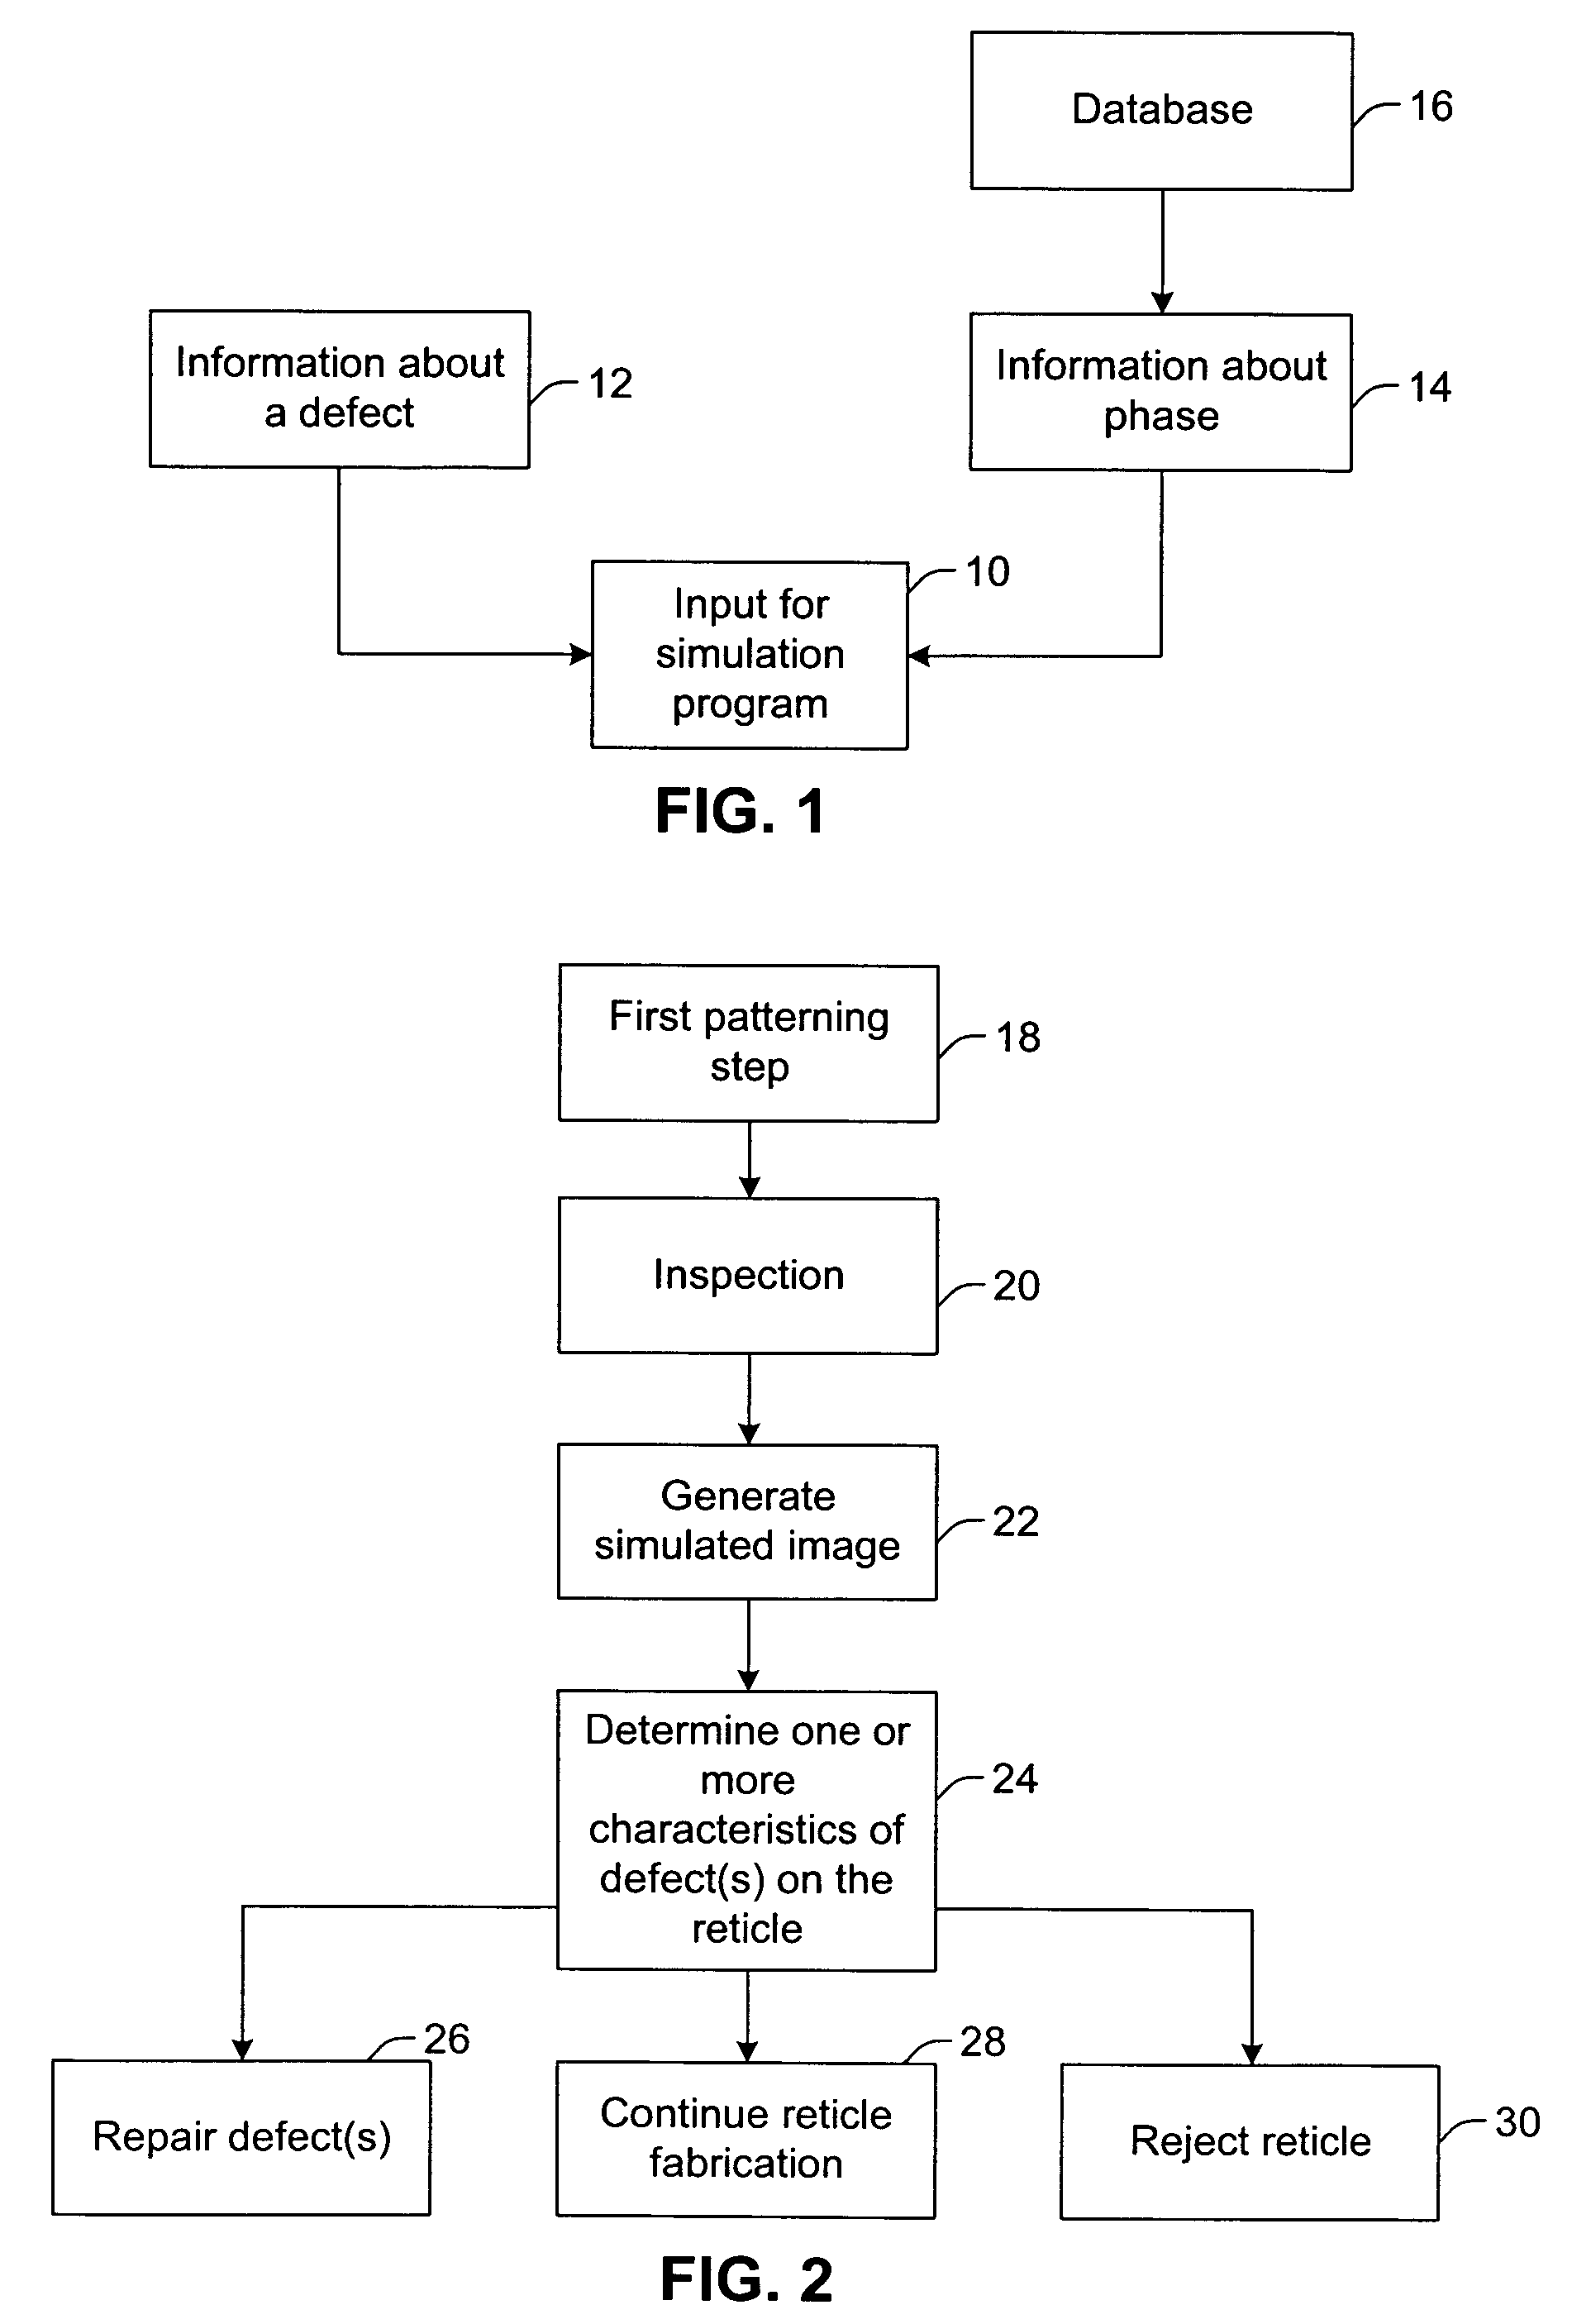 Computer-implemented methods for generating input for a simulation program or generating a simulated image of a reticle